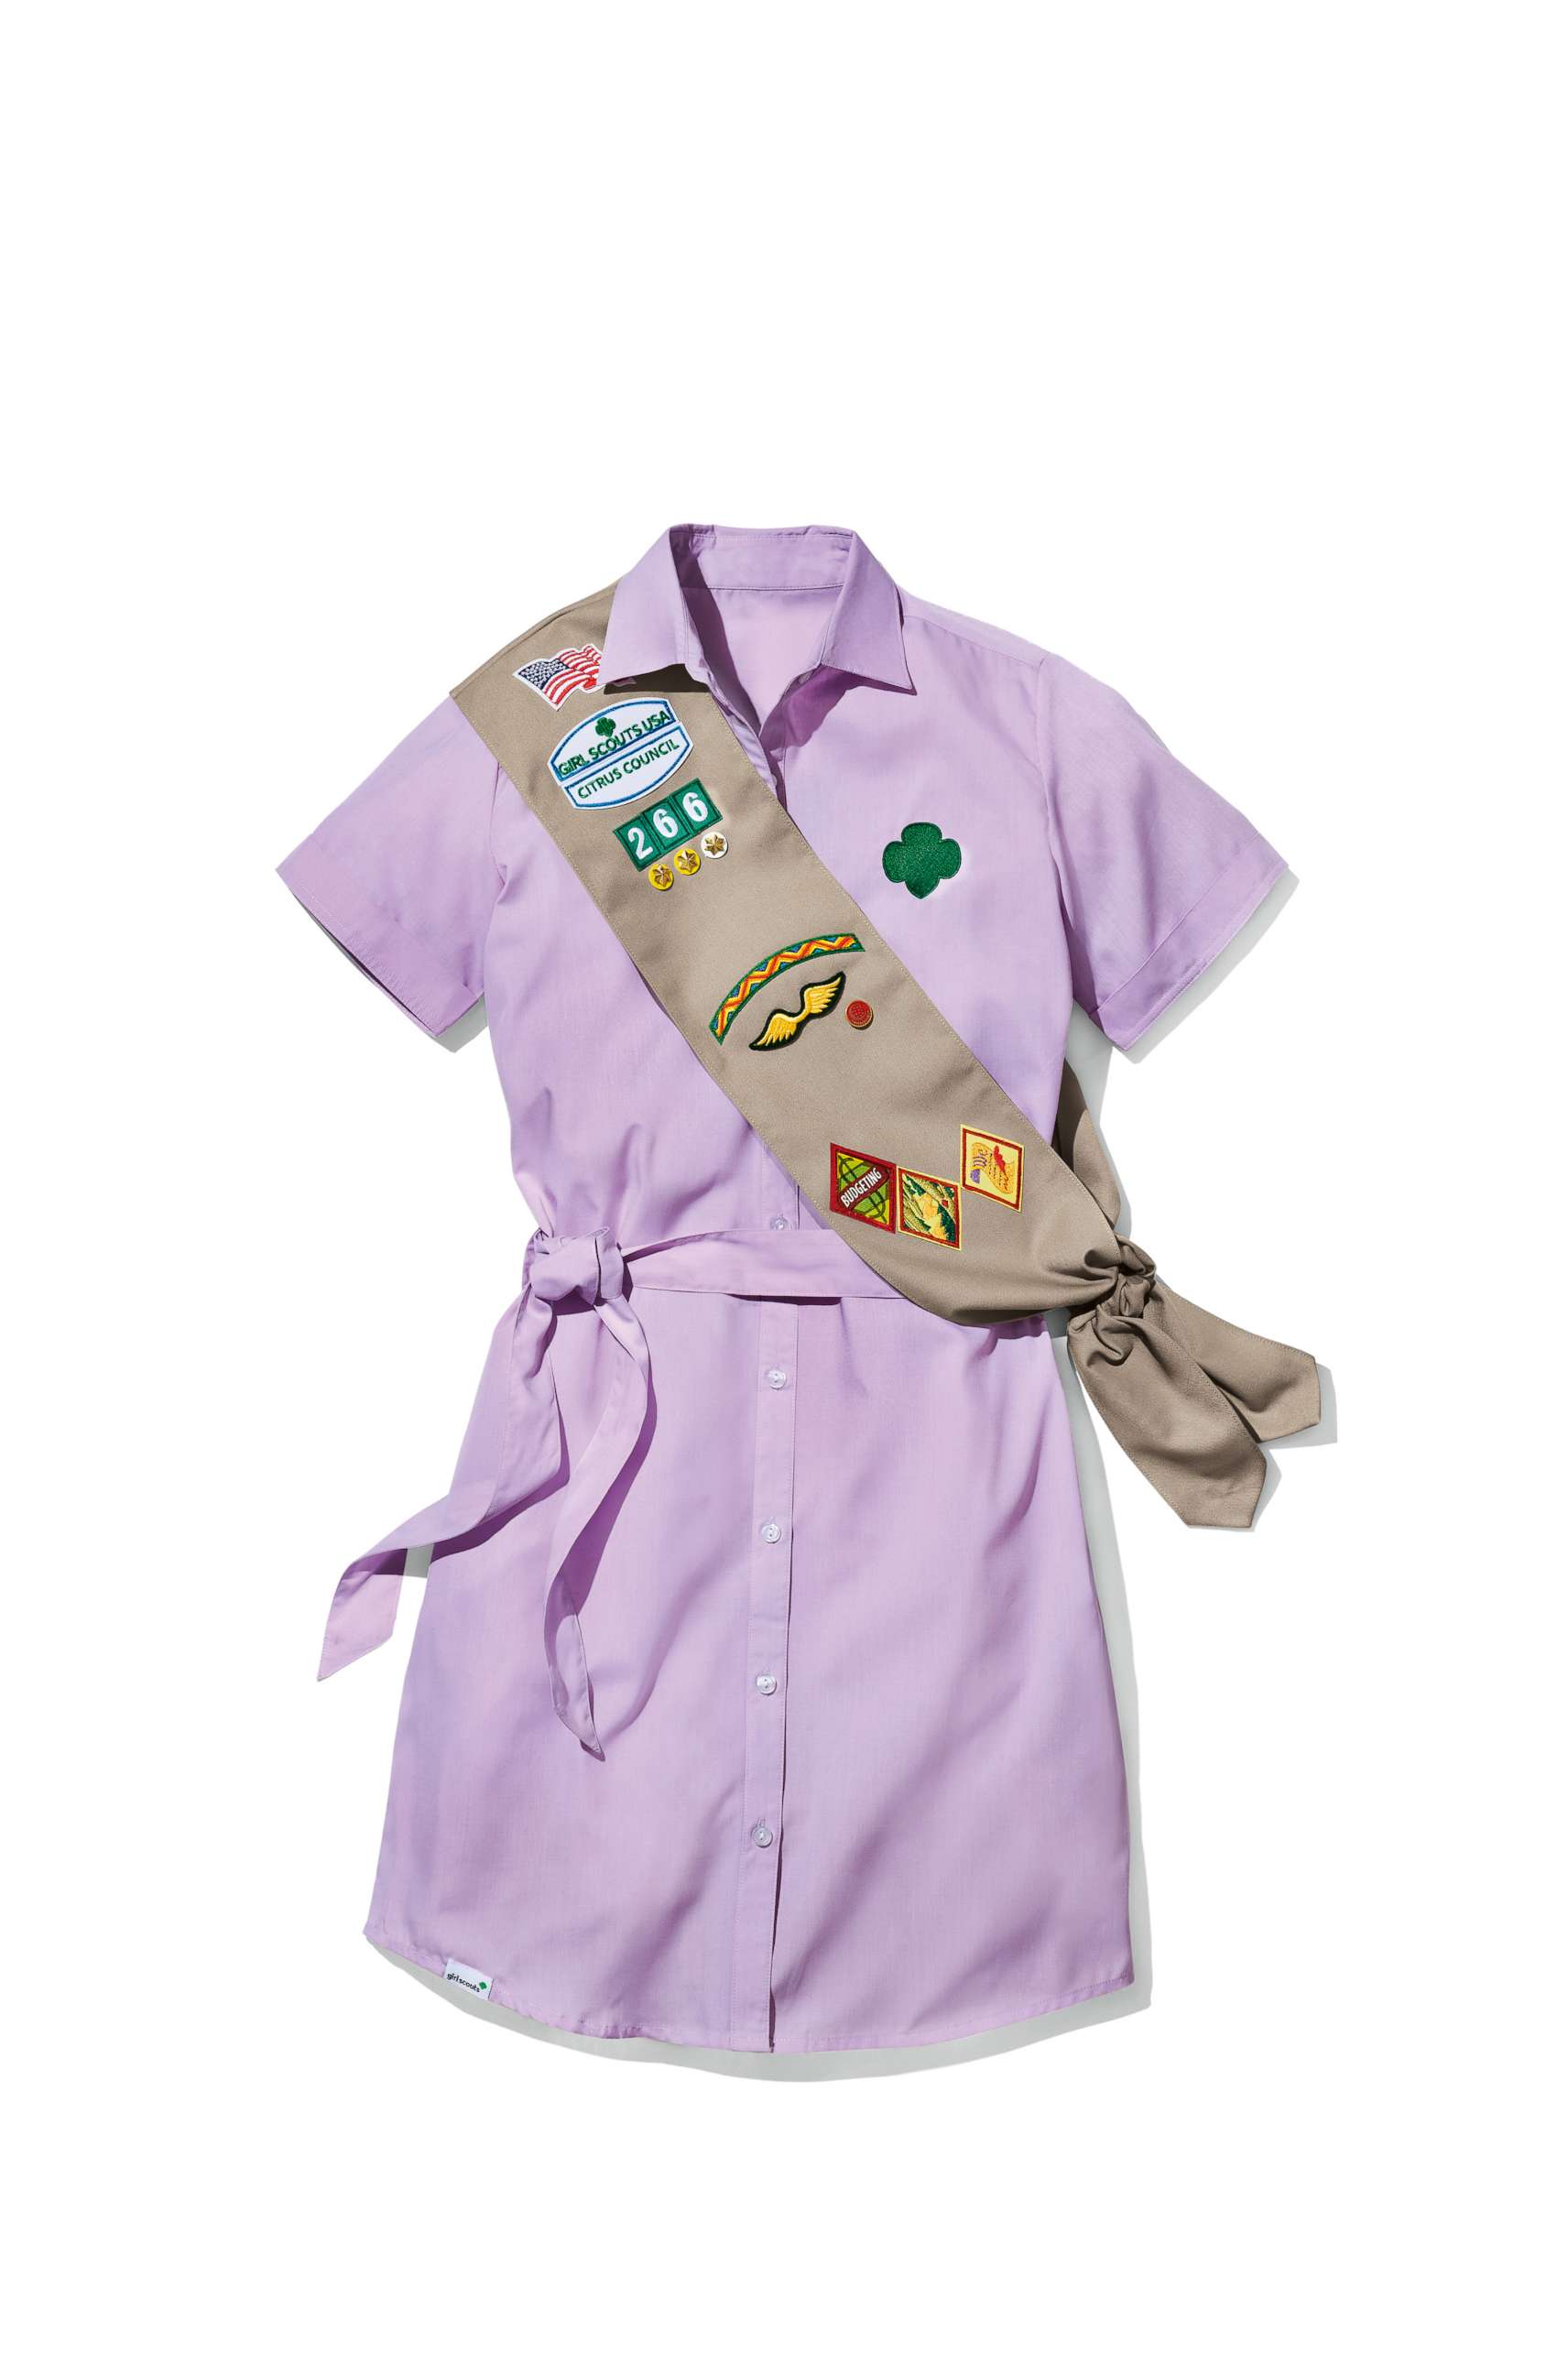 PHOTO: Updated 2020 Scout uniforms are shown in an undated photo released by the Girl Scouts of the USA. Aug. 25, 2020.